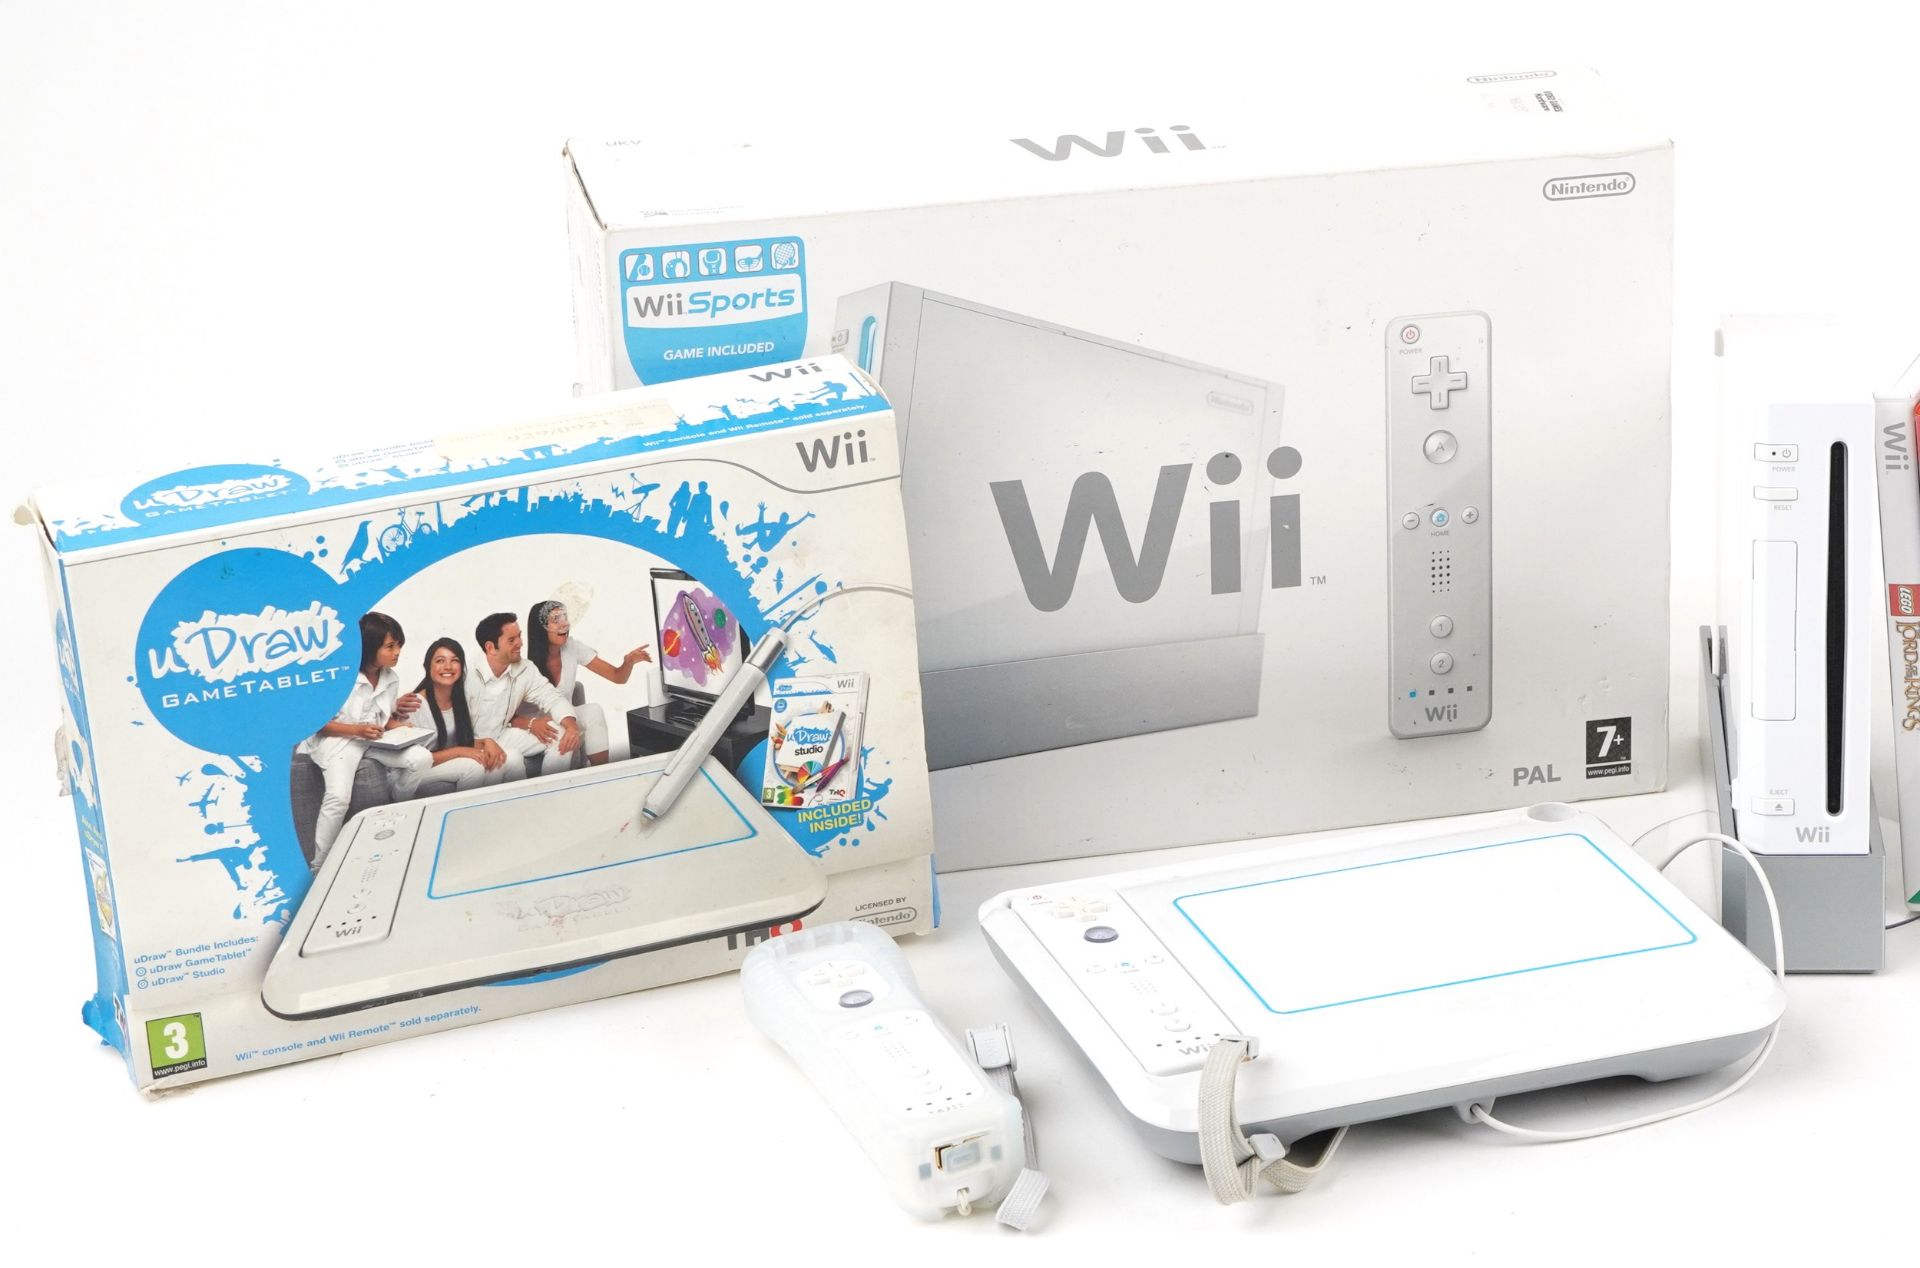 Nintendo Wii games console with accessories and a collection of games including U Drew, Wii Sports - Image 2 of 3